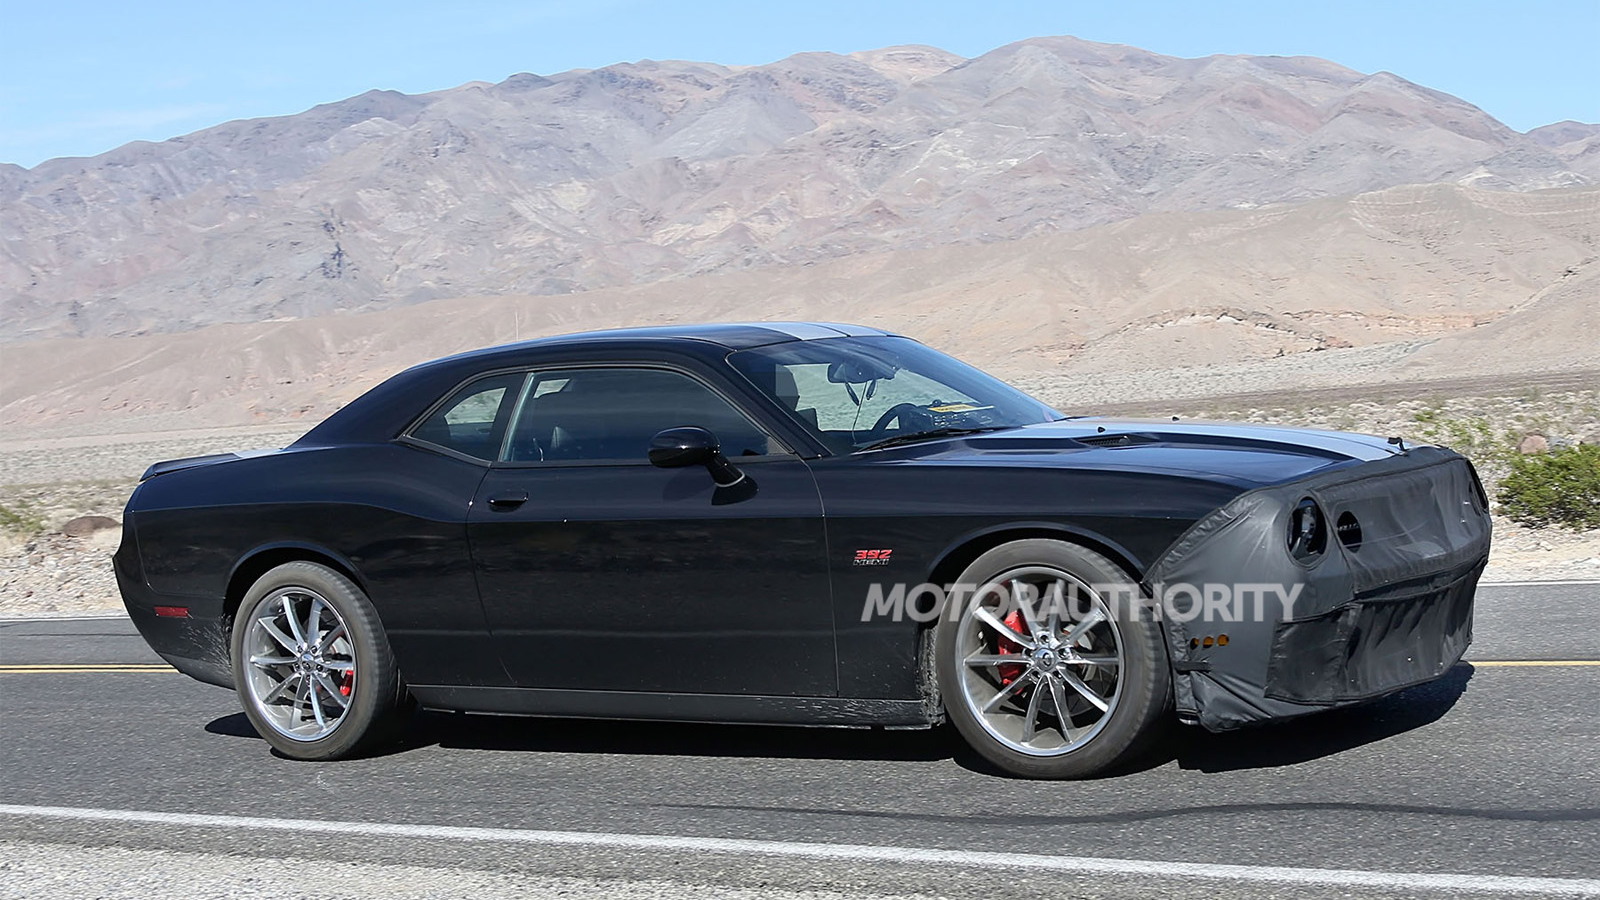 Spy shots of a 2015 Dodge Challenger SRT powered by the ‘Hellcat’ supercharged HEMI V-8